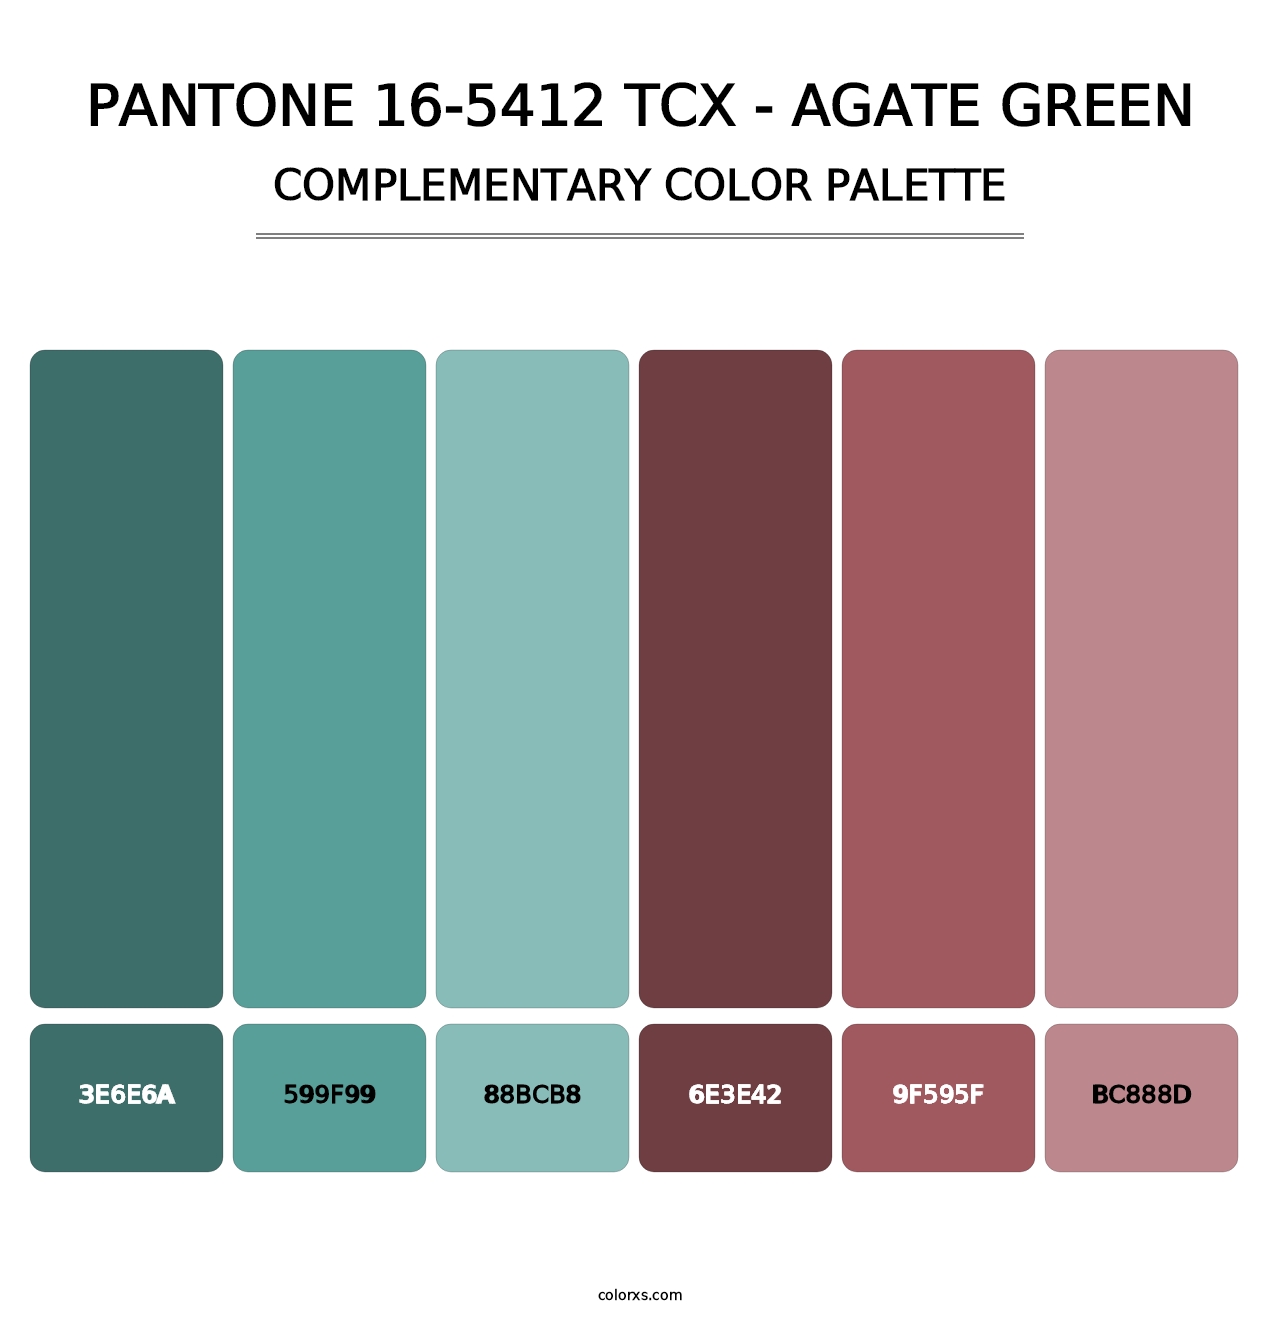 PANTONE 16-5412 TCX - Agate Green - Complementary Color Palette